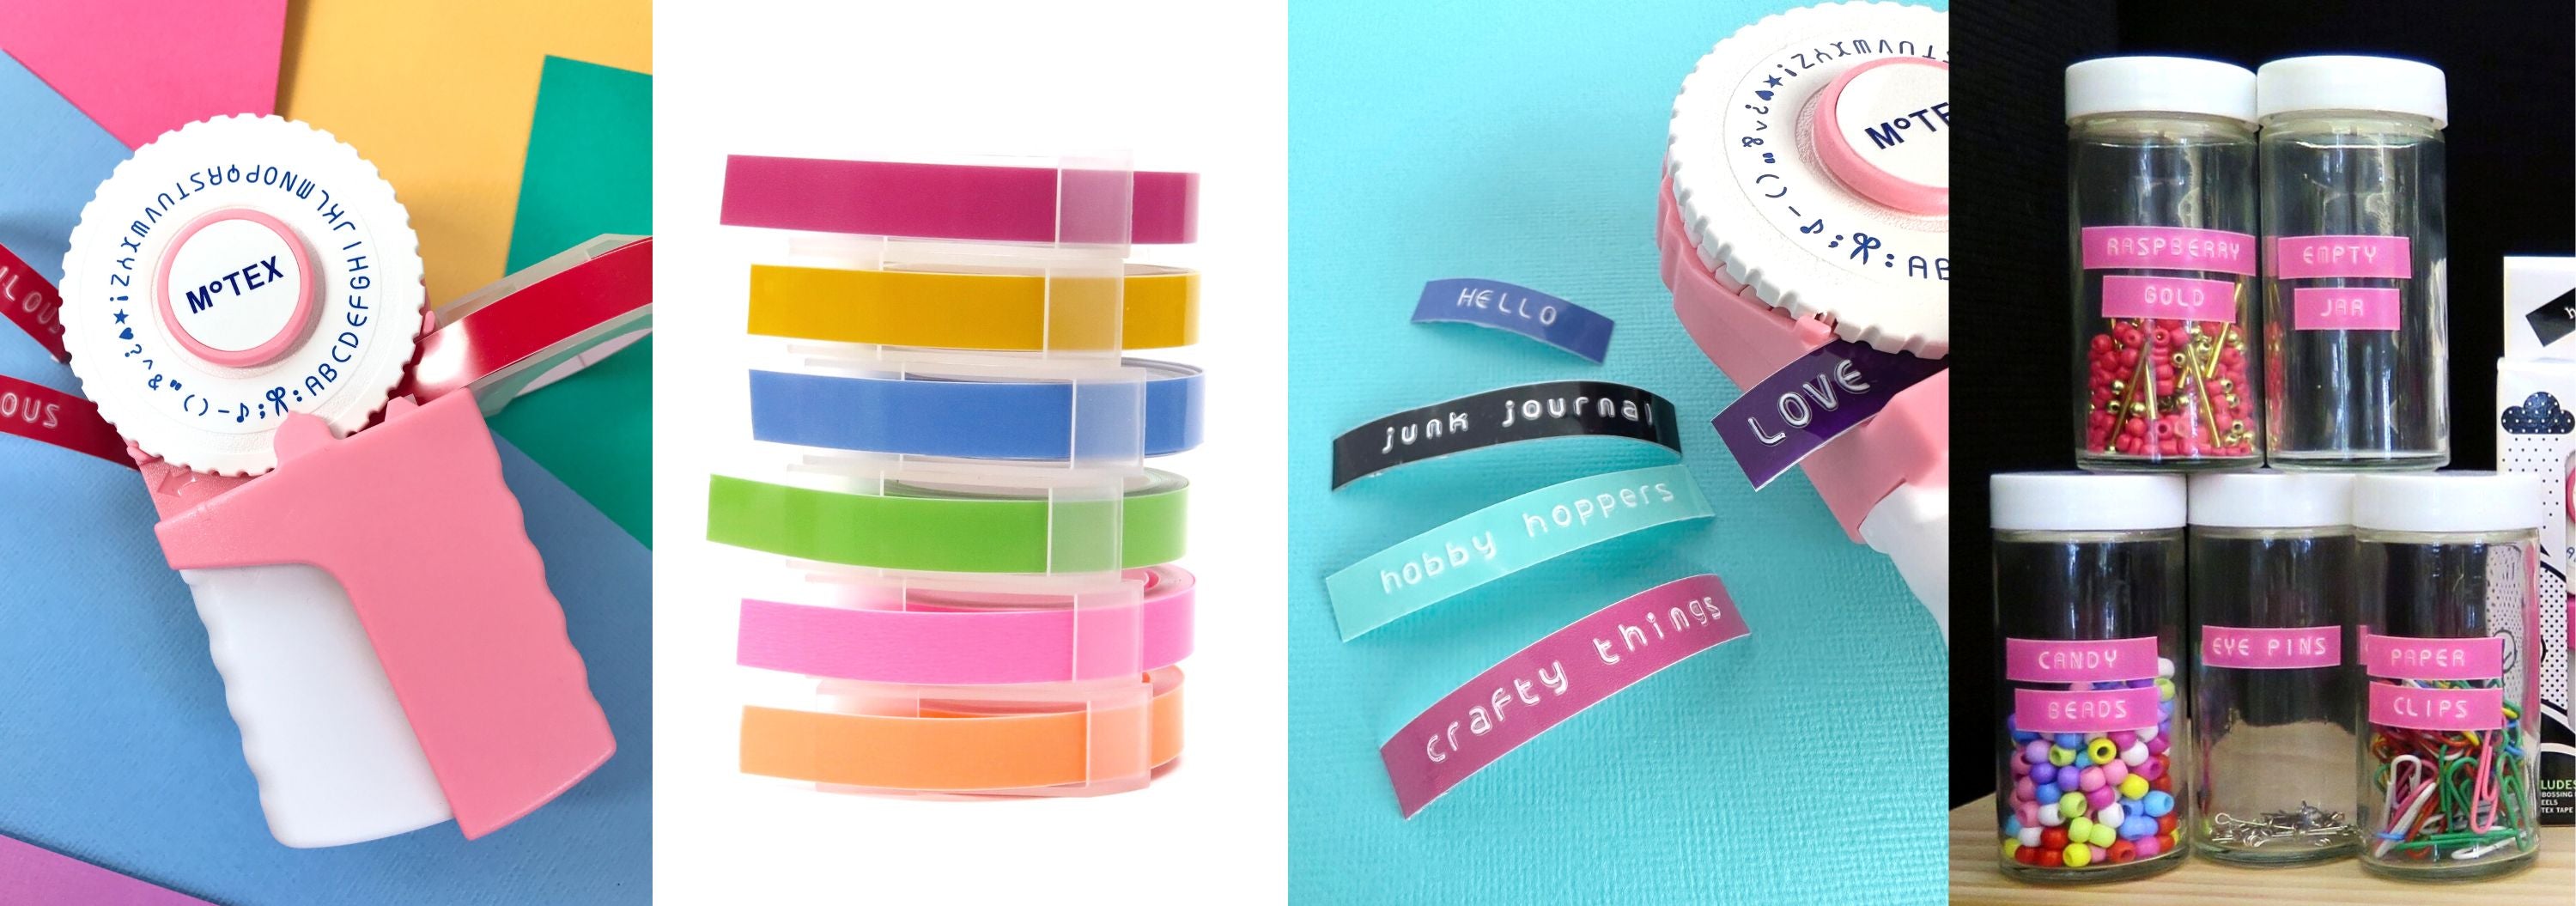 Motex label makers and refills perfect for organising and creating.